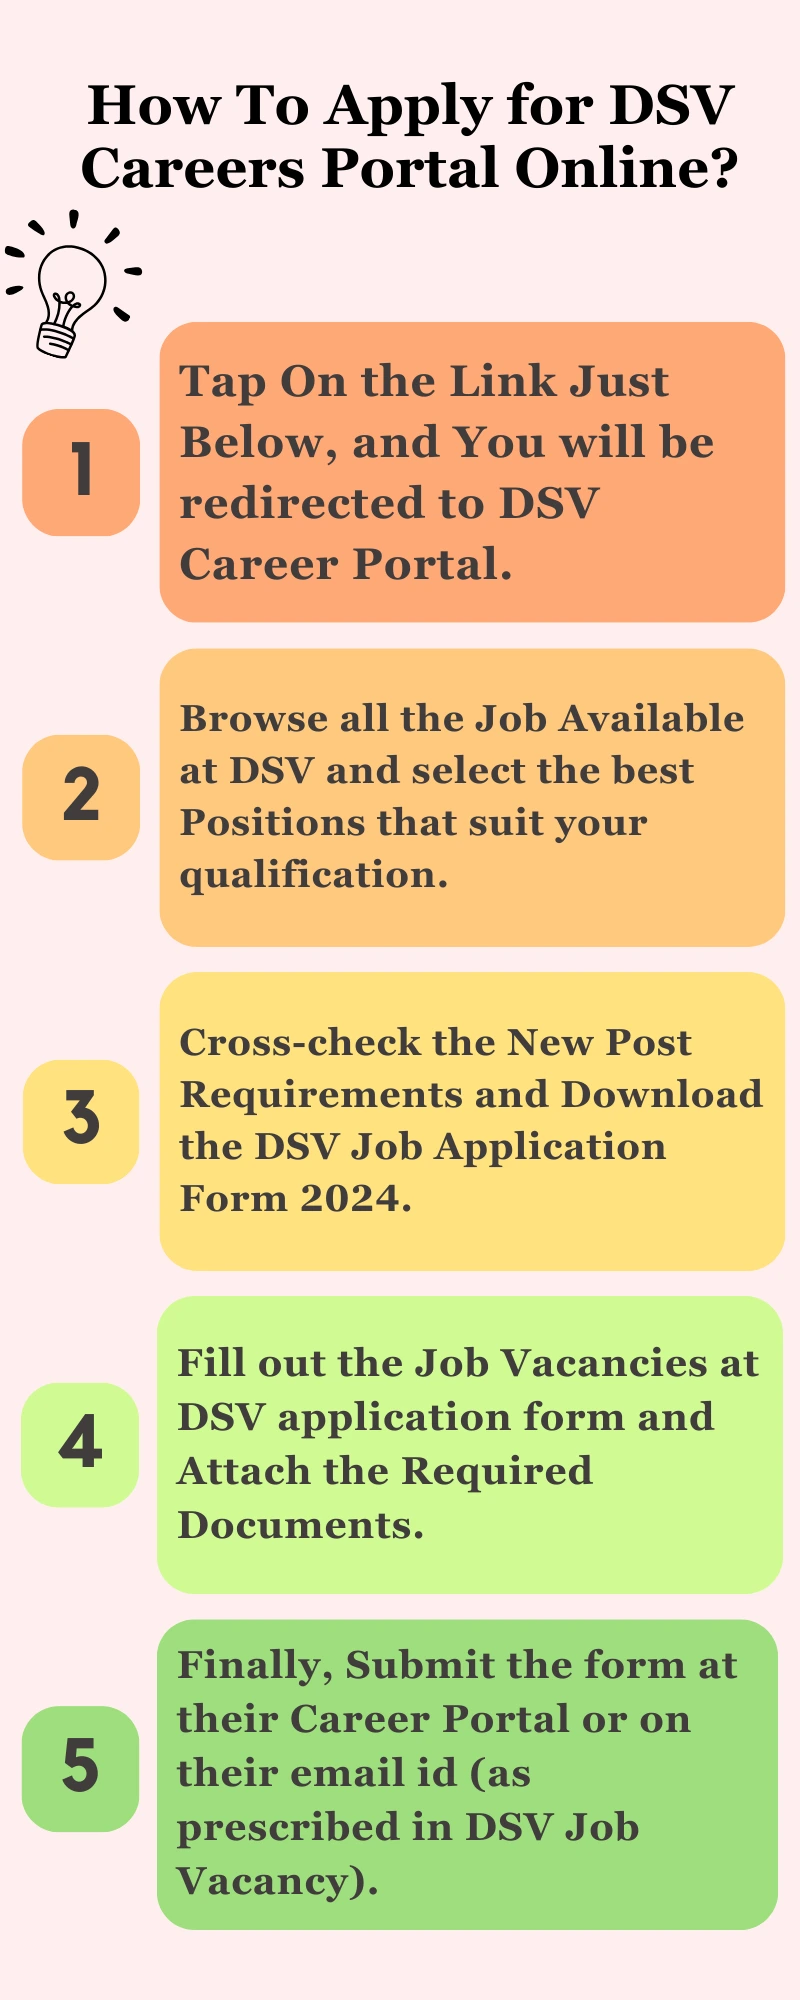 How To Apply for DSV Careers Portal Online?